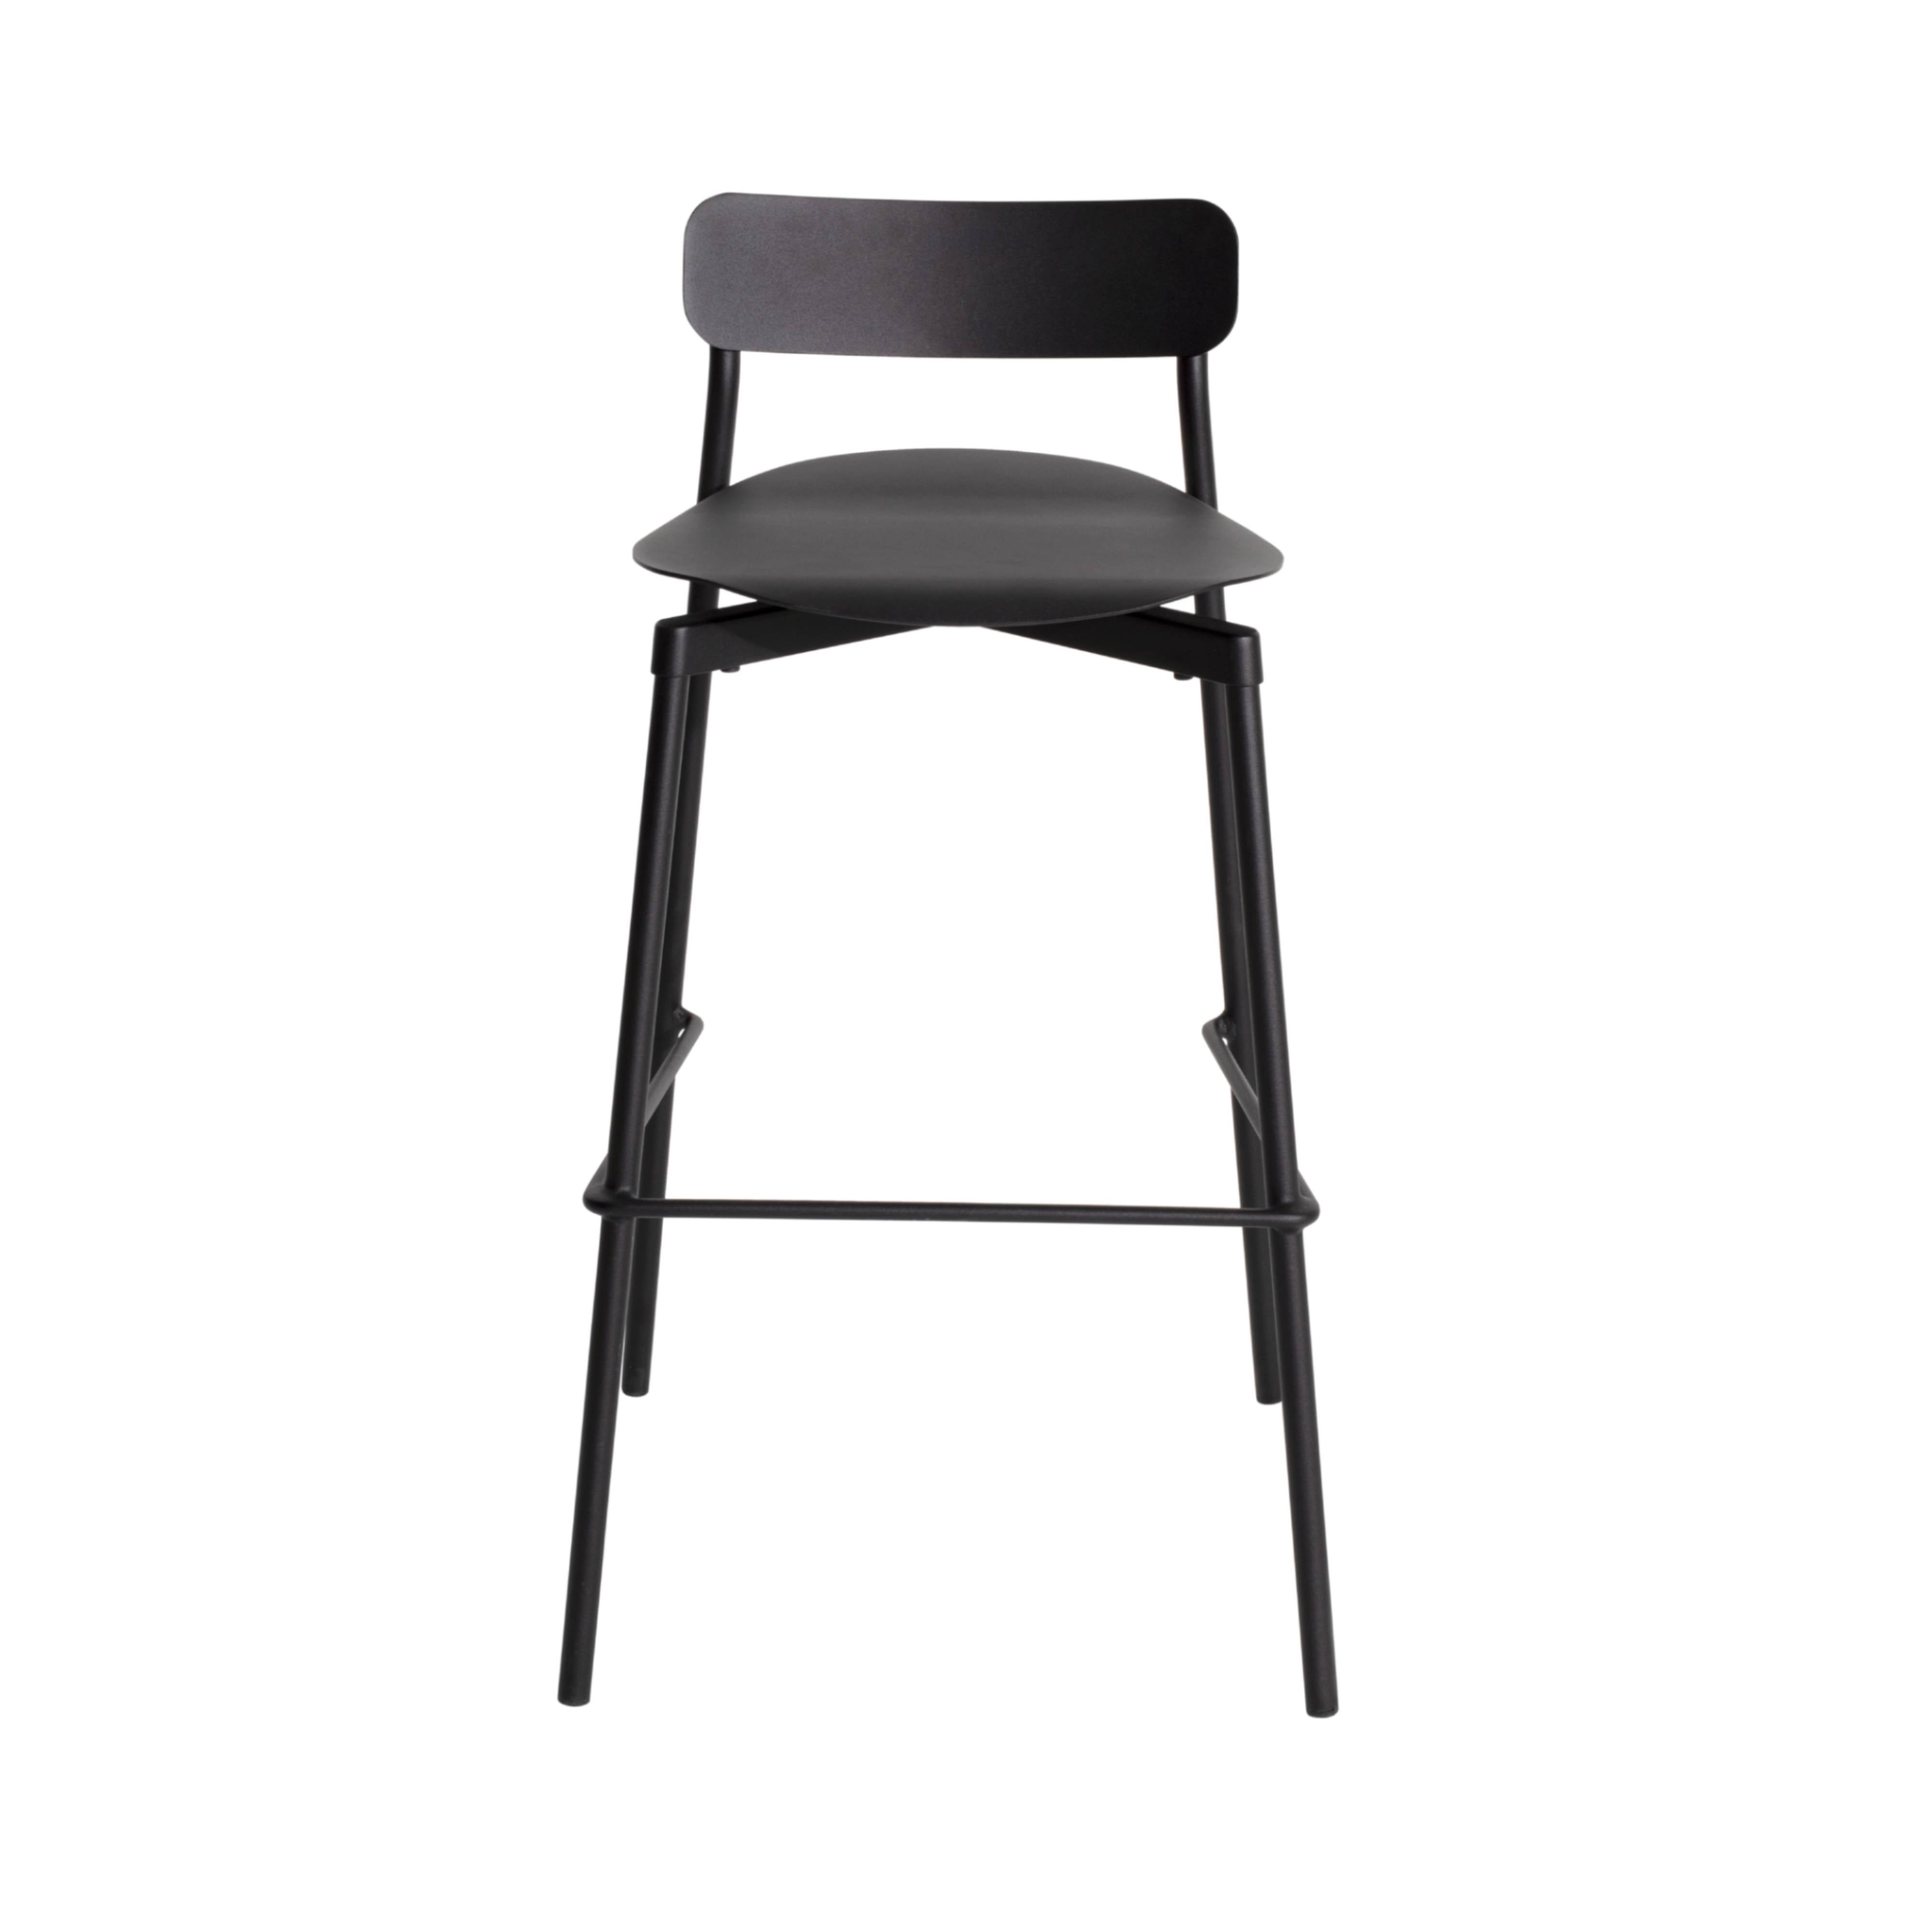  Fromme Stacking Bar + Counter Stool: Bar + Black